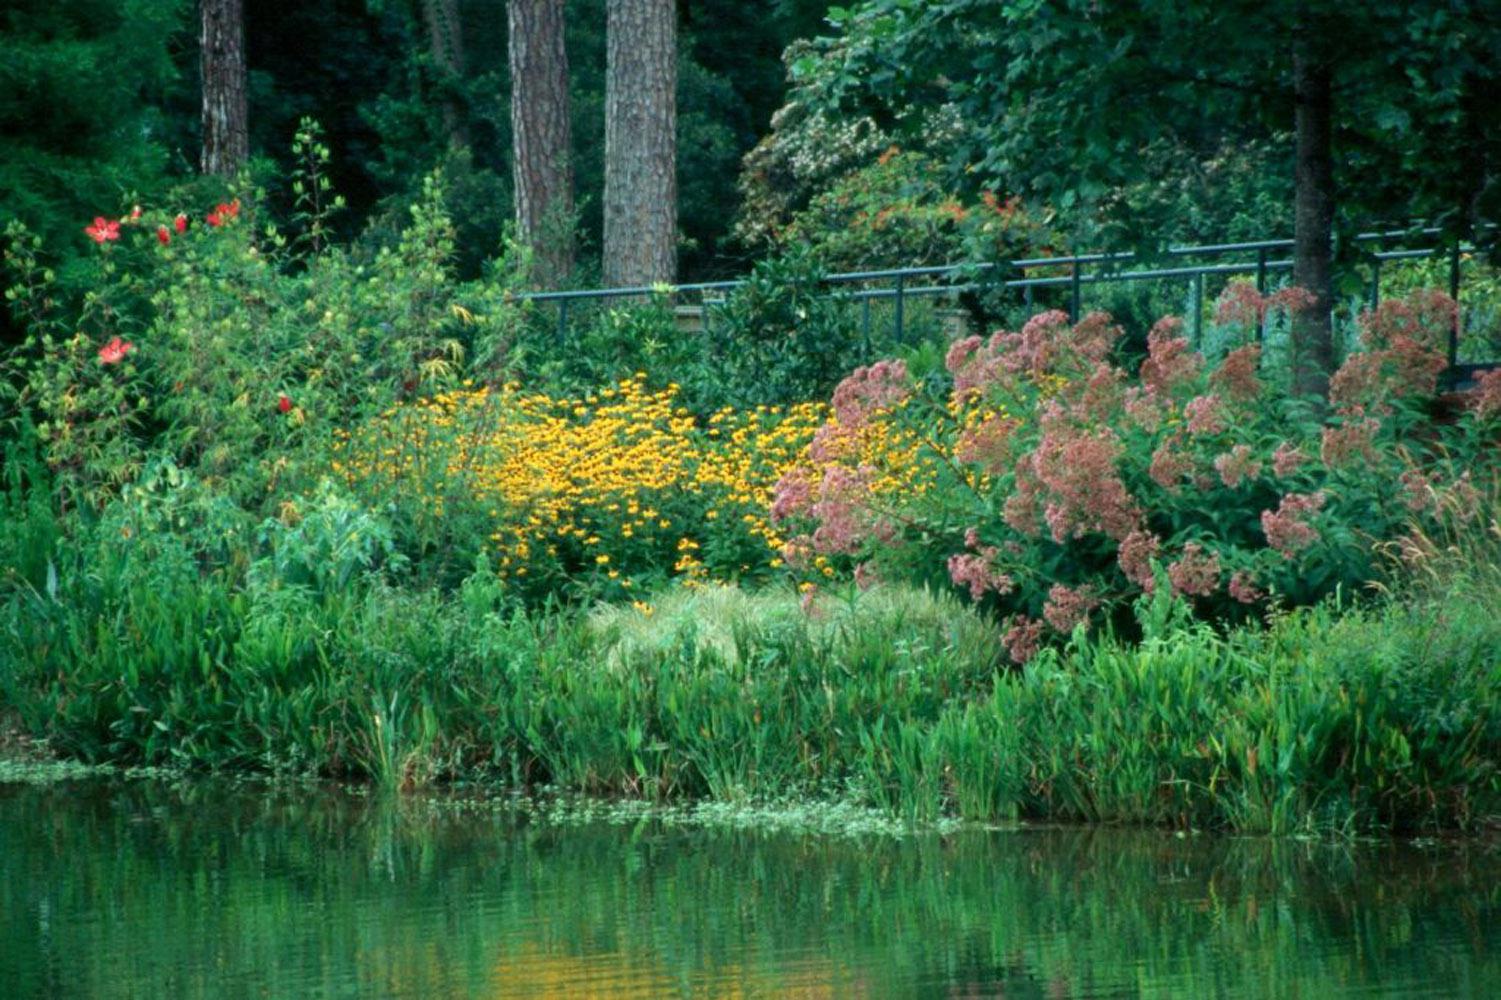 Joe Pye weed and Goldsturm rudbeckia partner well in this lakeside planting, looking impressive even from a distance.